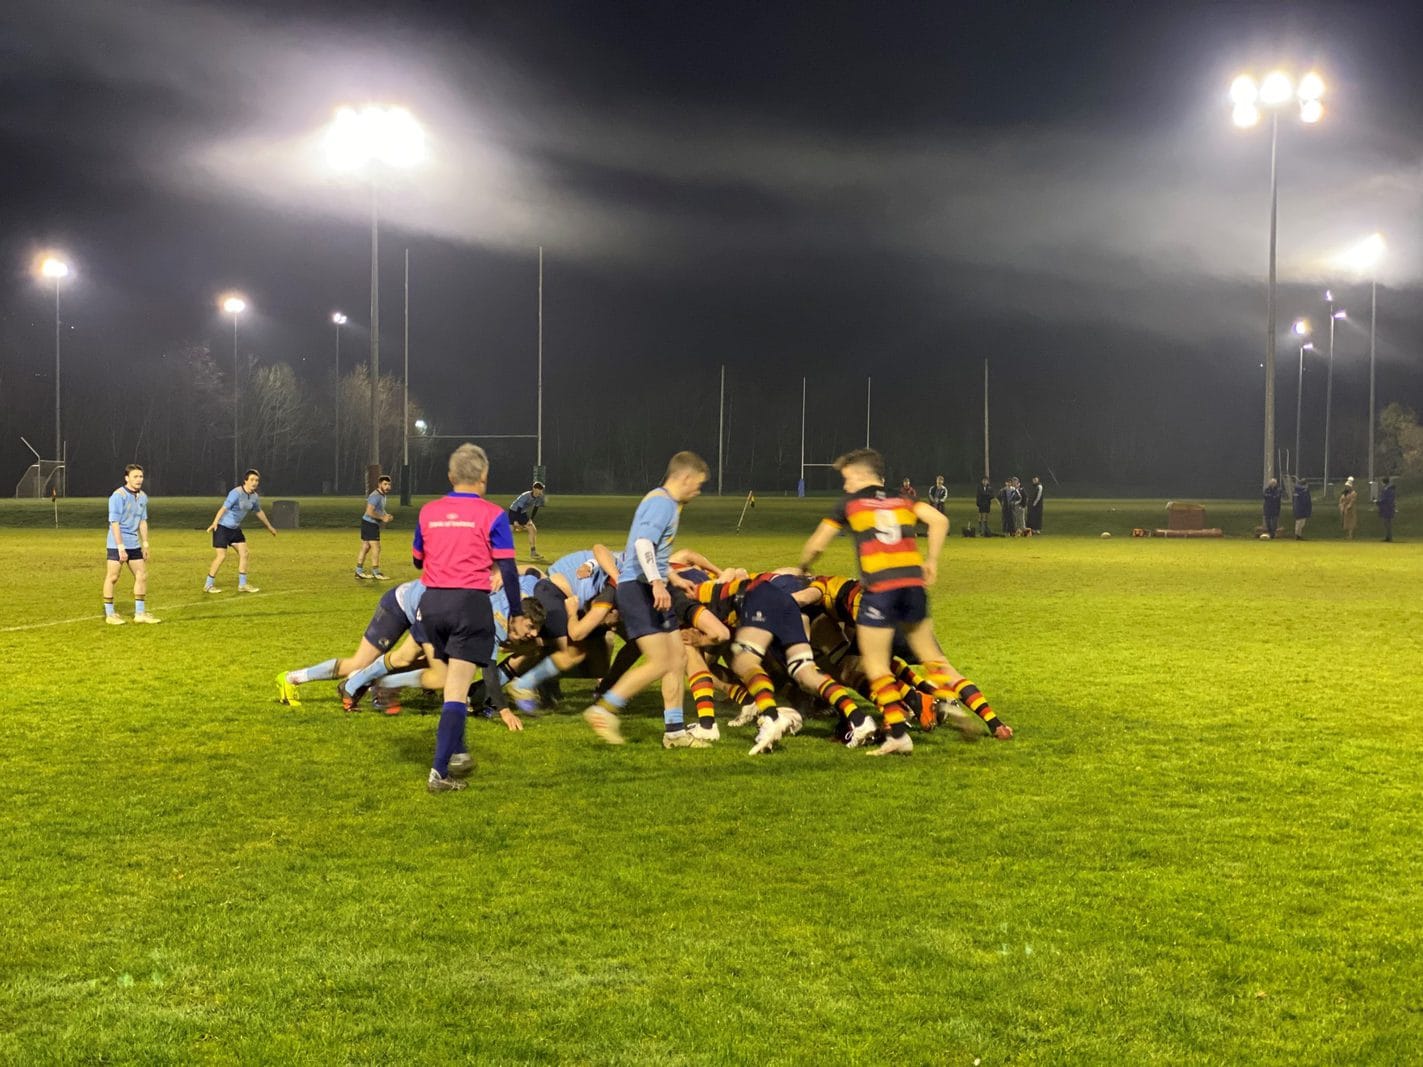 J3s Bow Out of Moran Cup dengan Heads Holds High to Excellent UCD Side